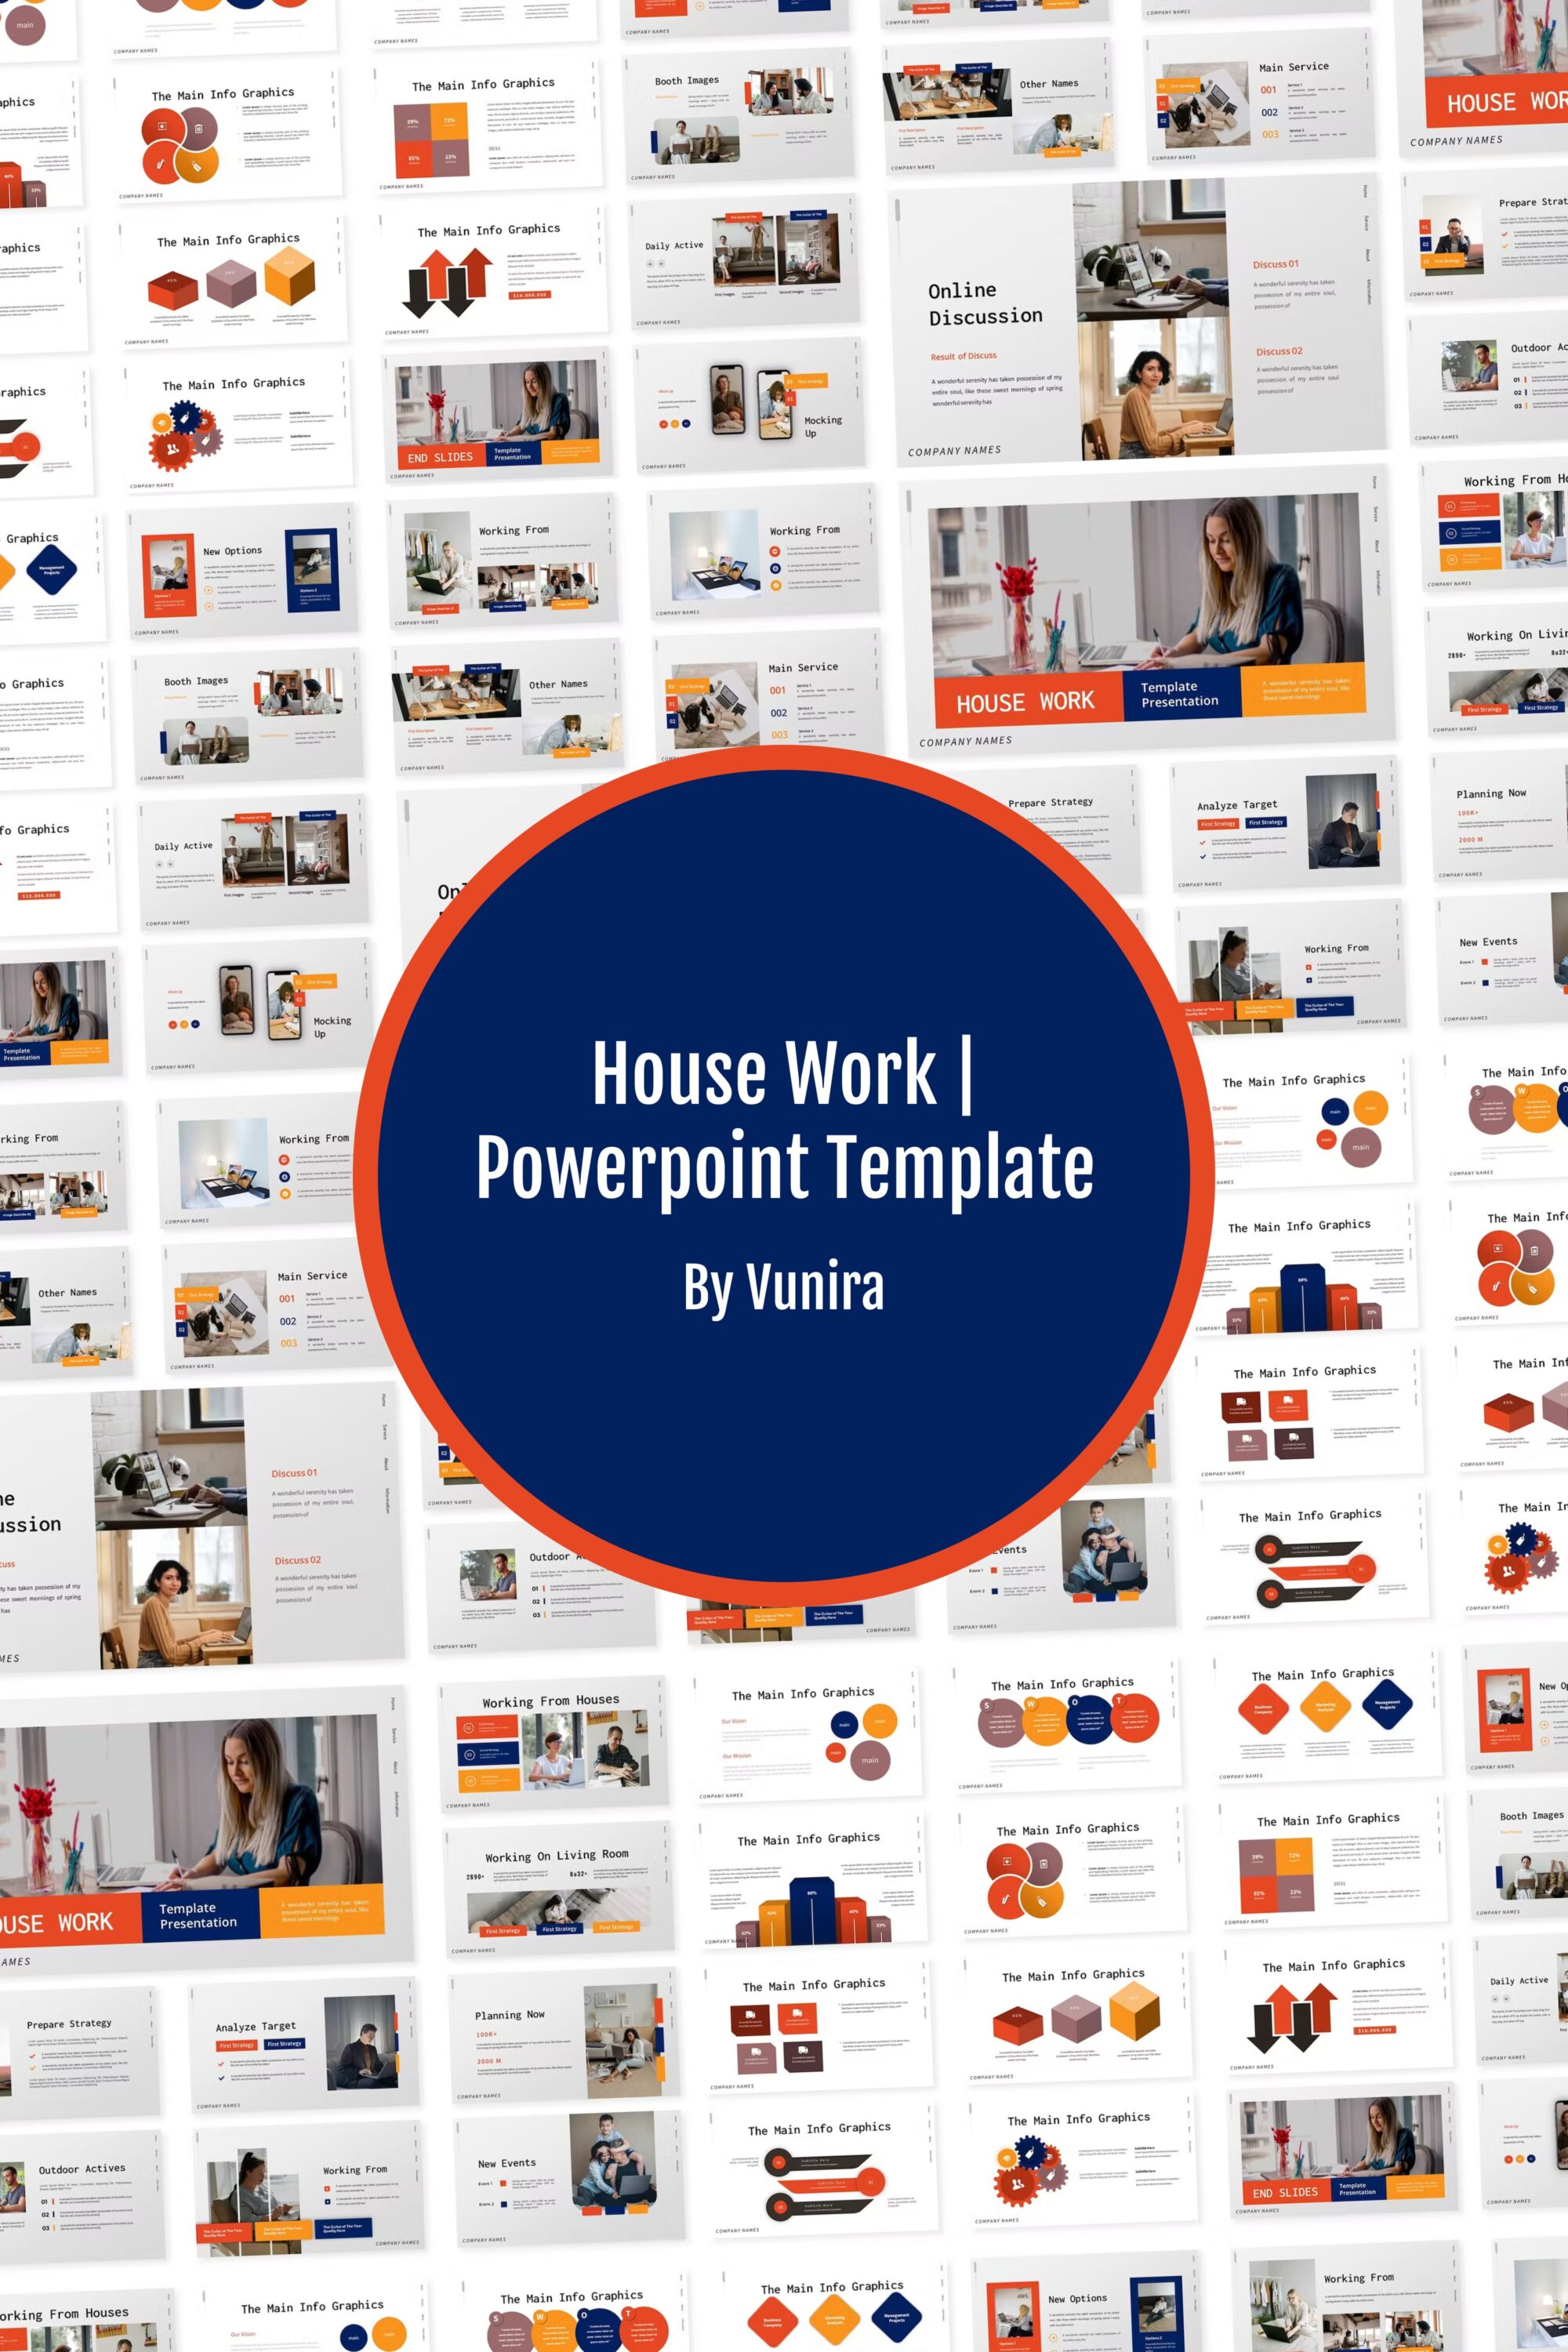 House work powerpoint template of pinterest.